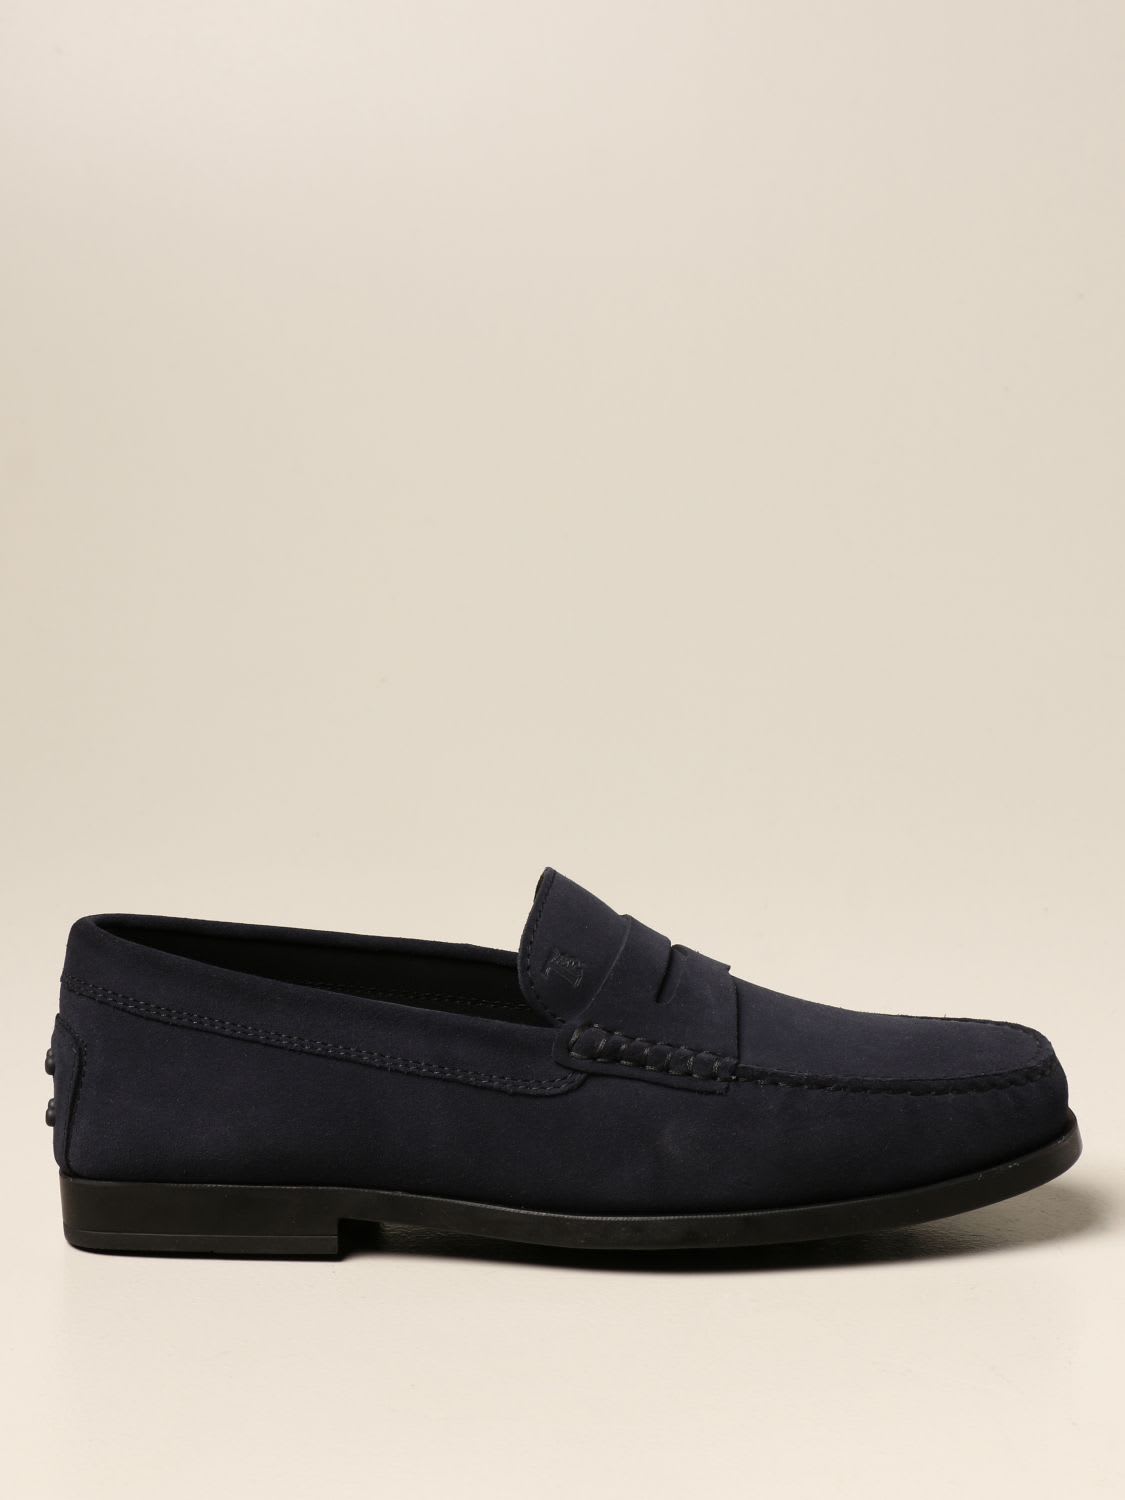 Tods Loafers Tods Suede Loafers With Rubber Sole